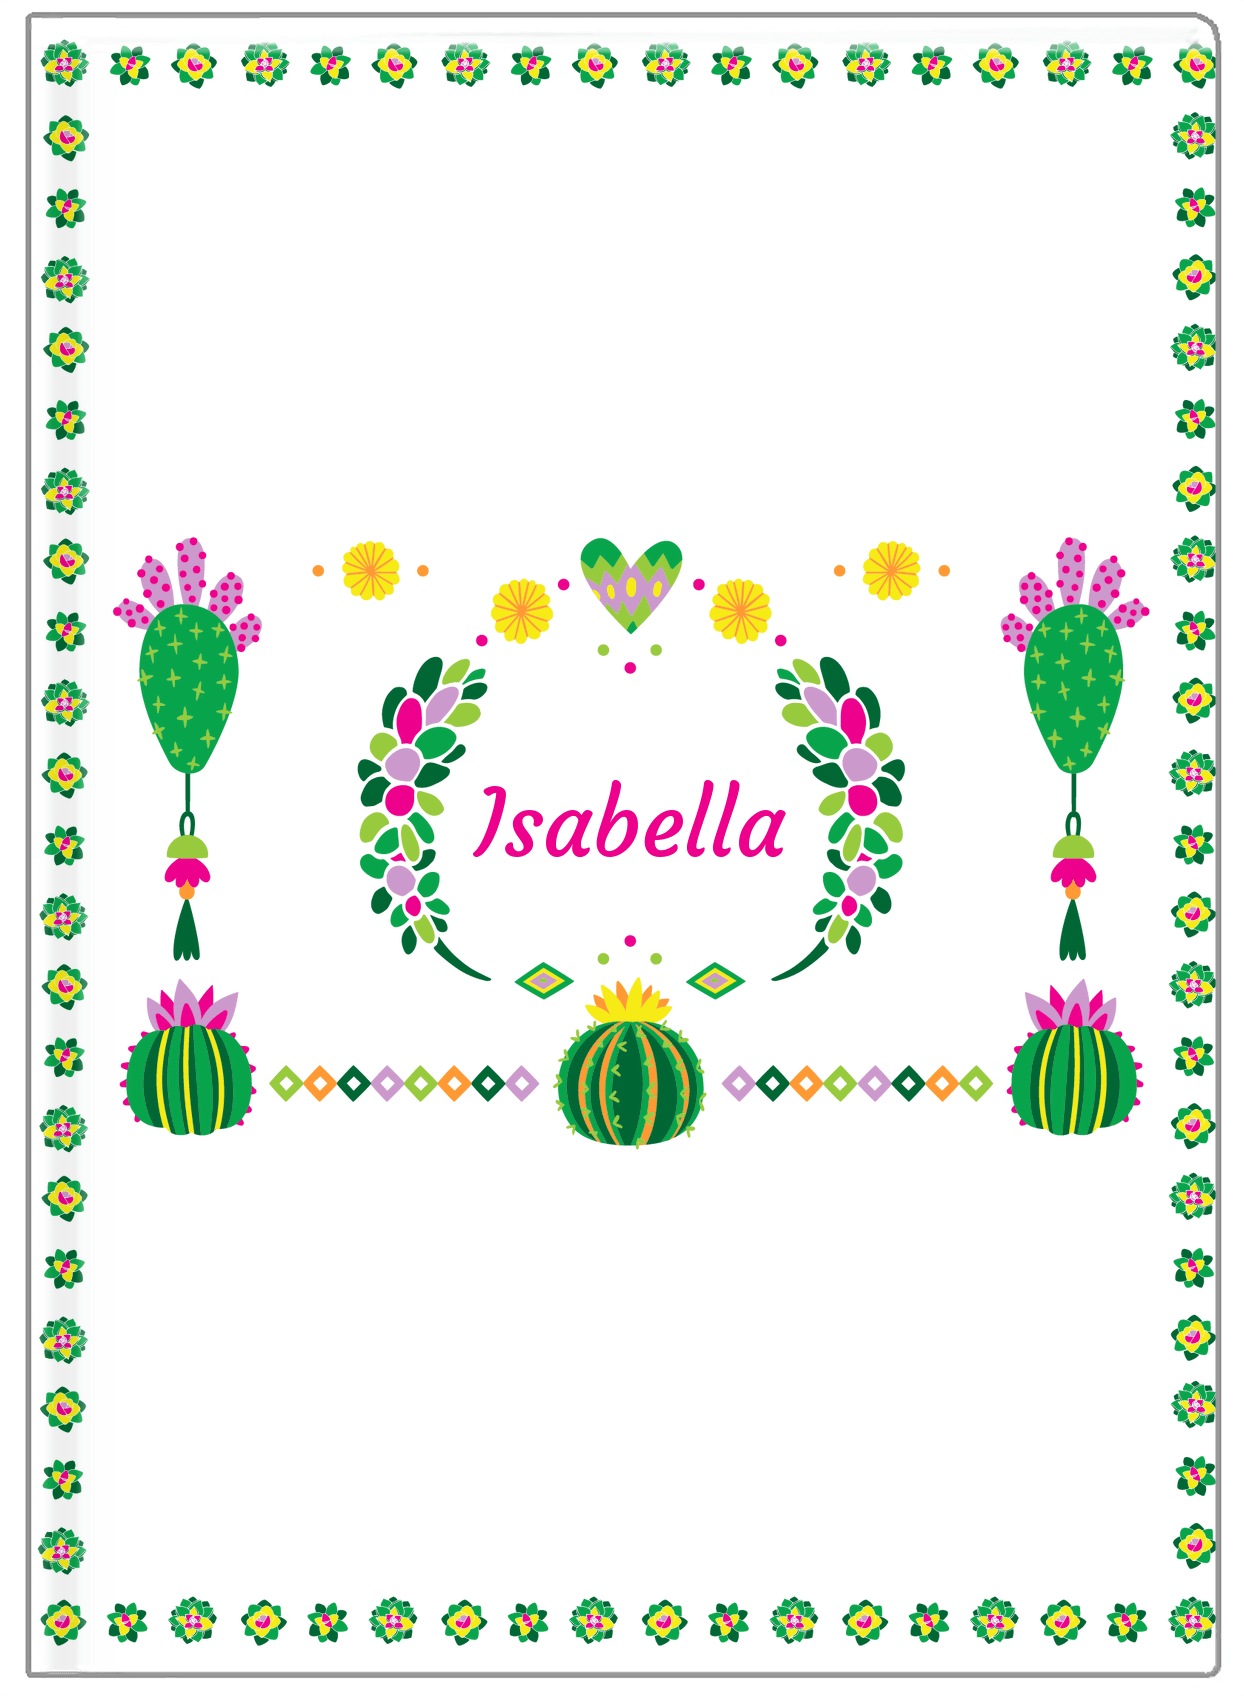 Personalized Cactus / Succulent Journal IV - Cactus Wreath - White Background - Front View